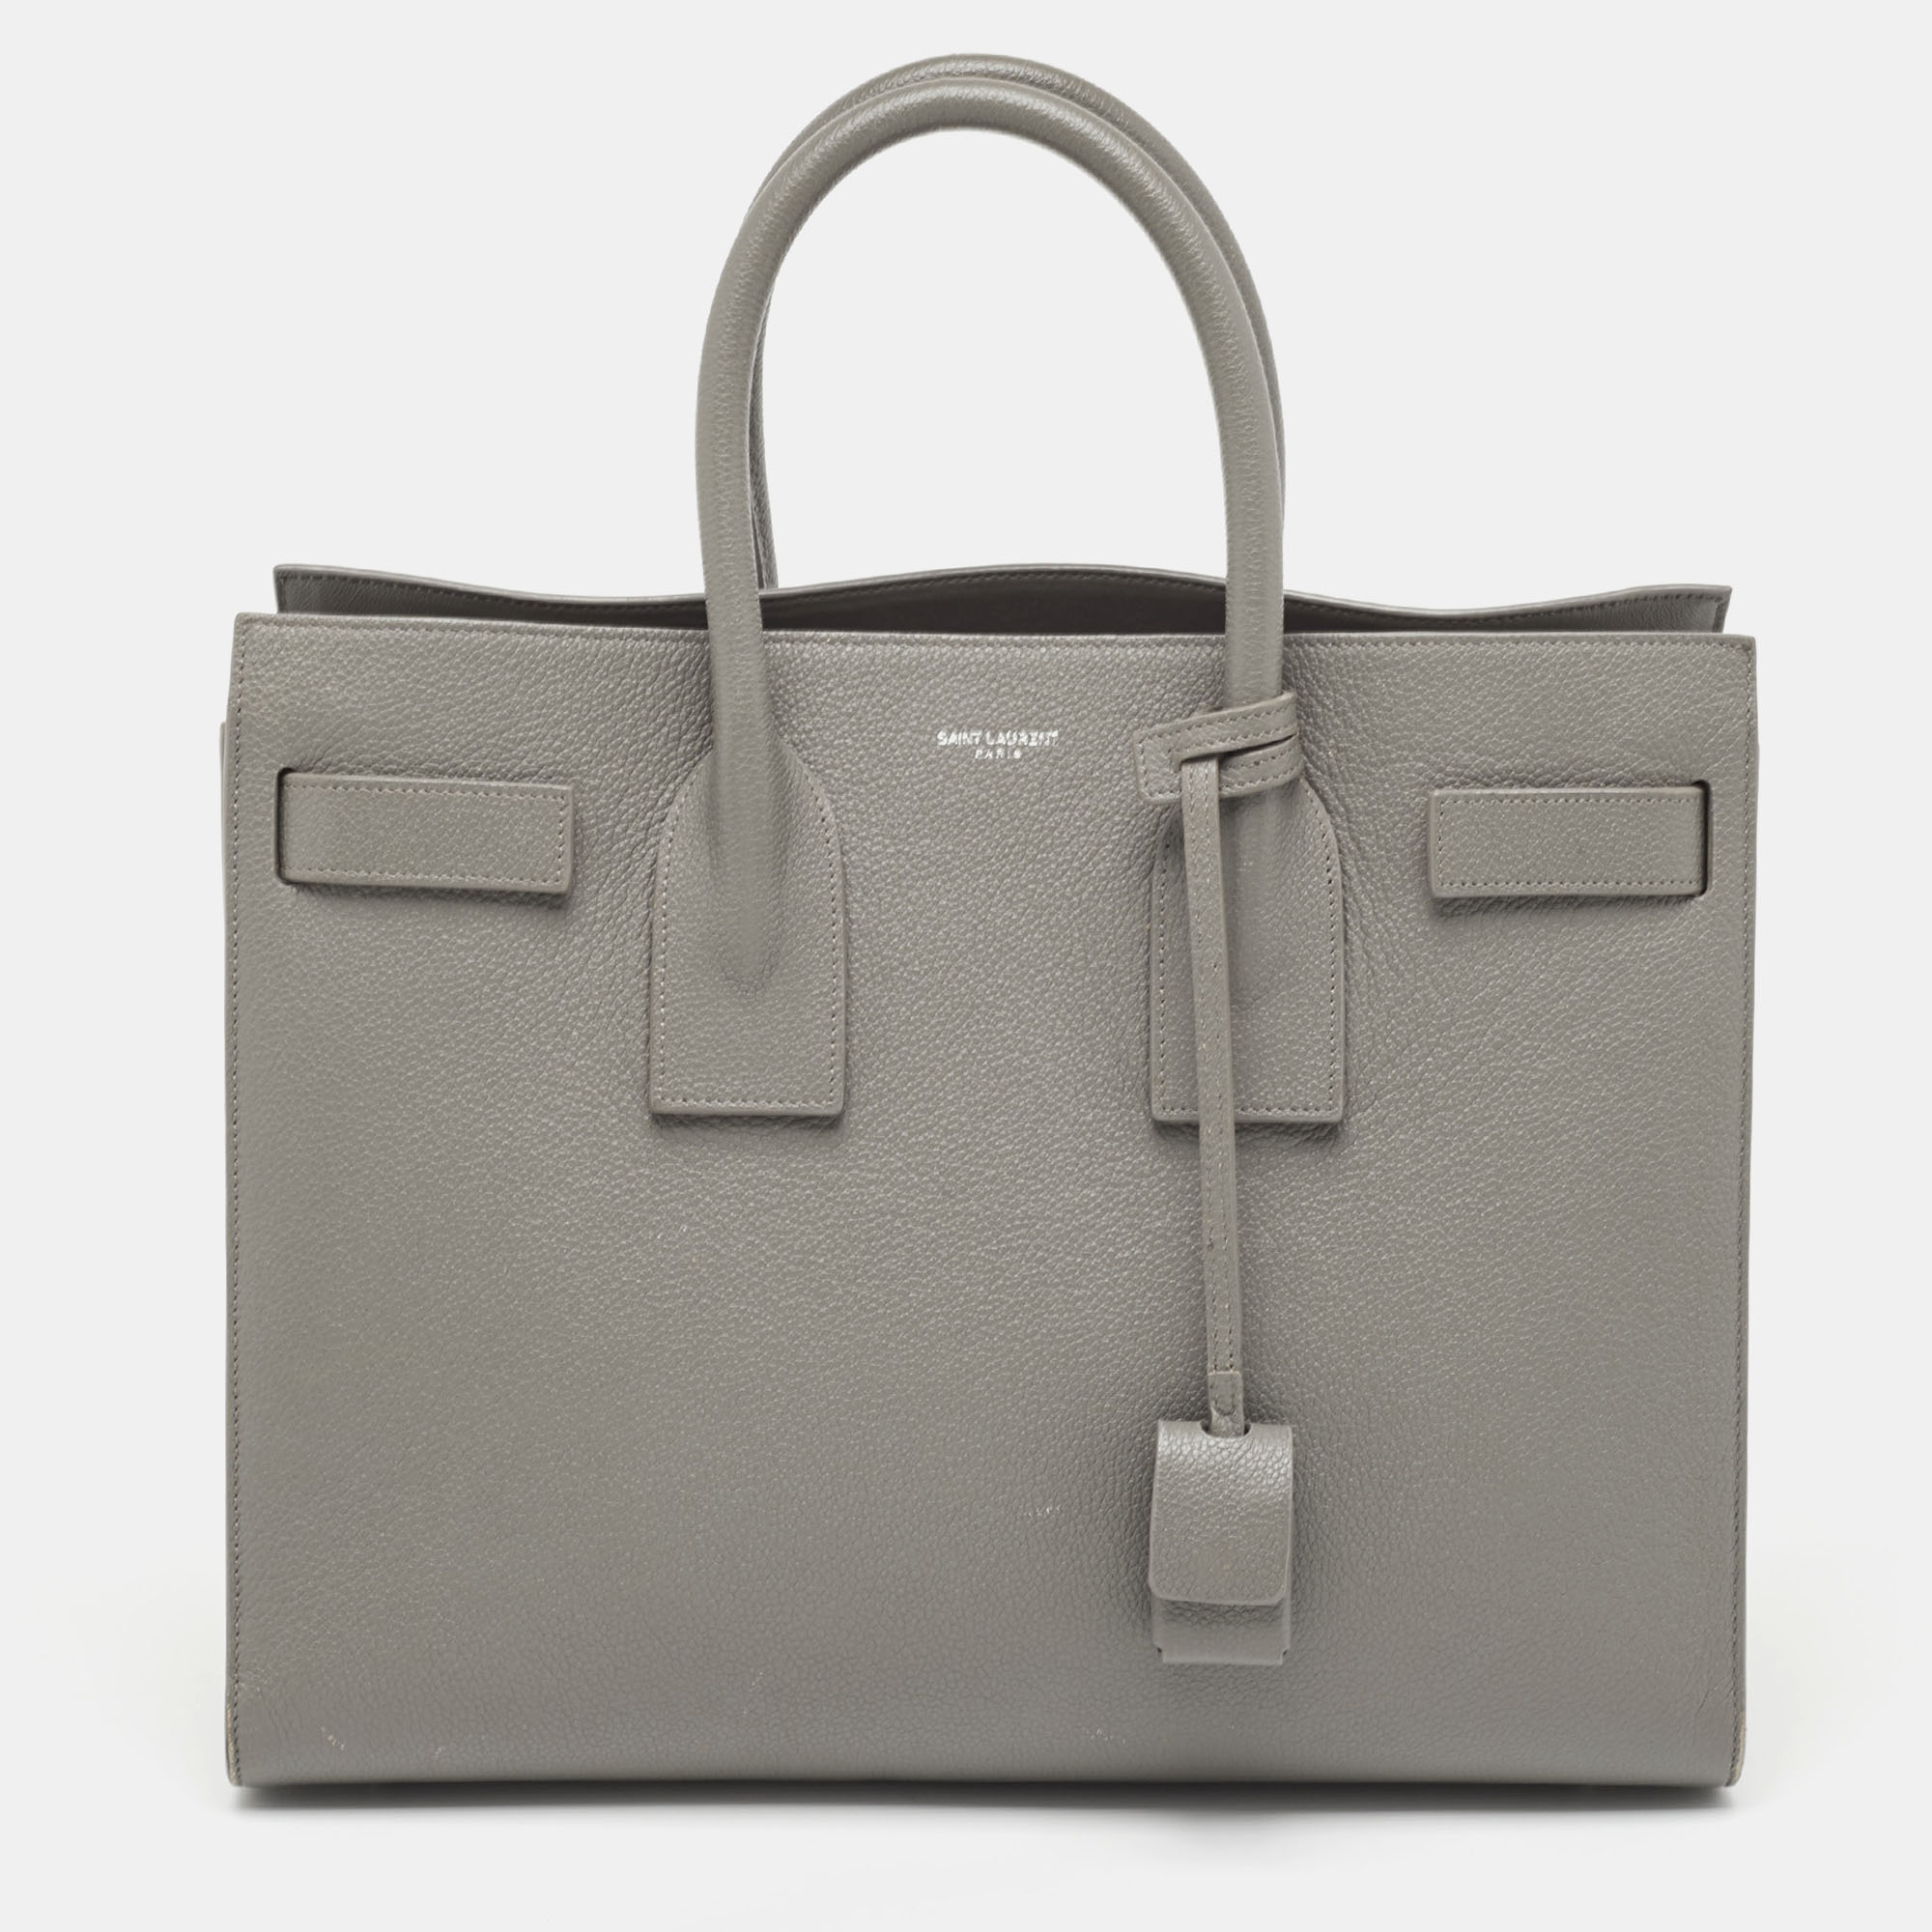 Pre-owned Saint Laurent Grey Leather Small Classic Sac De Jour Tote